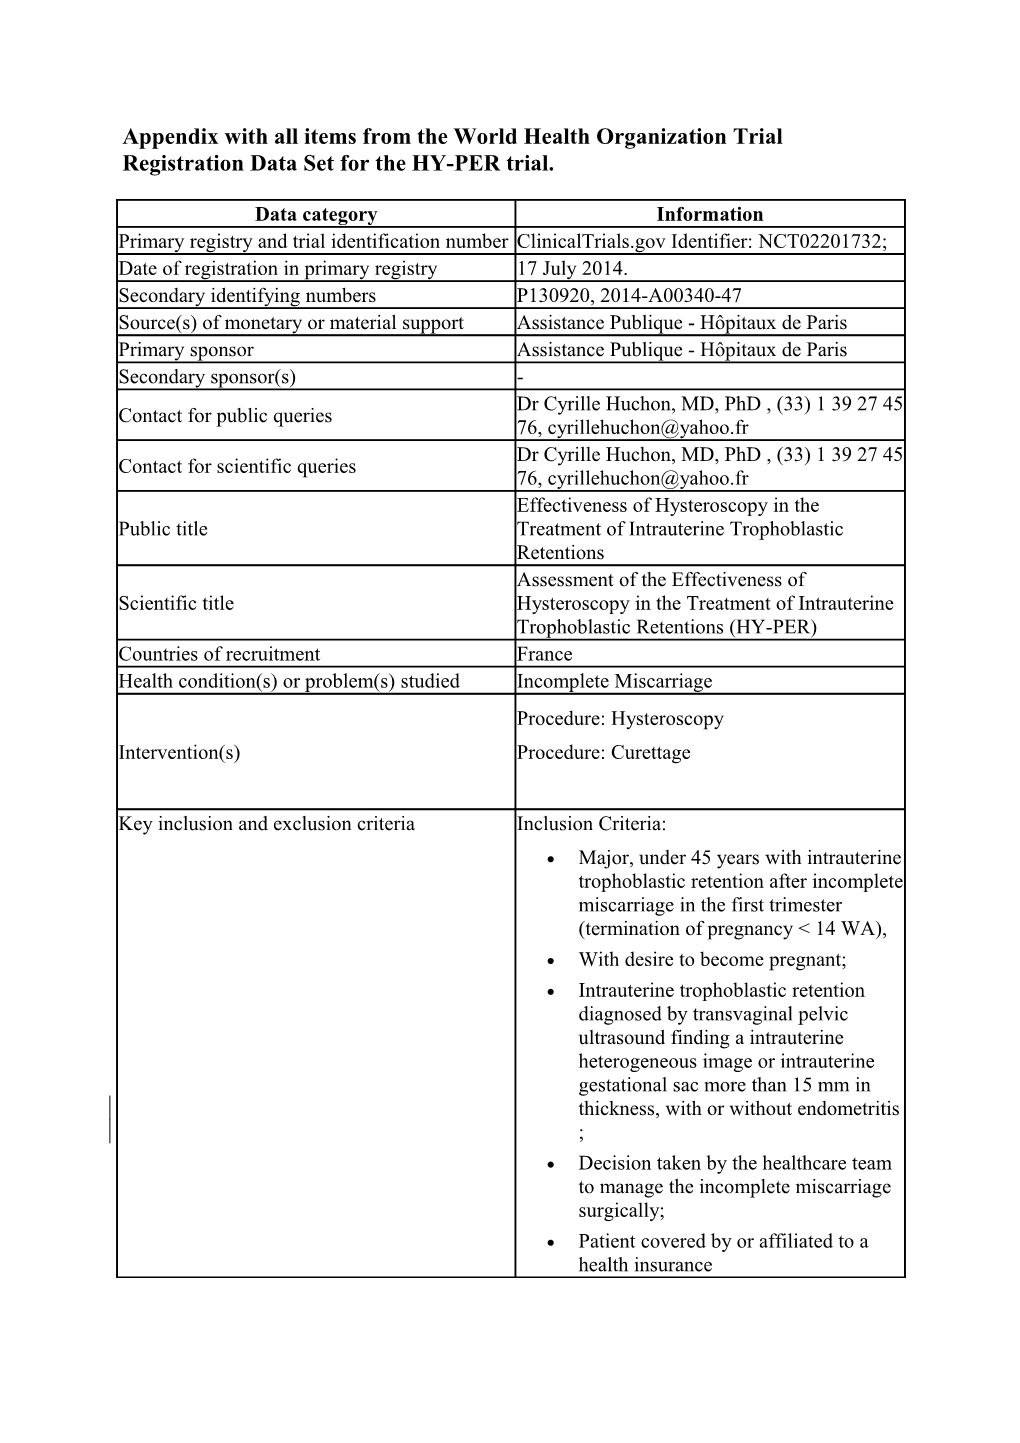 Appendix with All Items from the World Health Organization Trial Registration Data Set